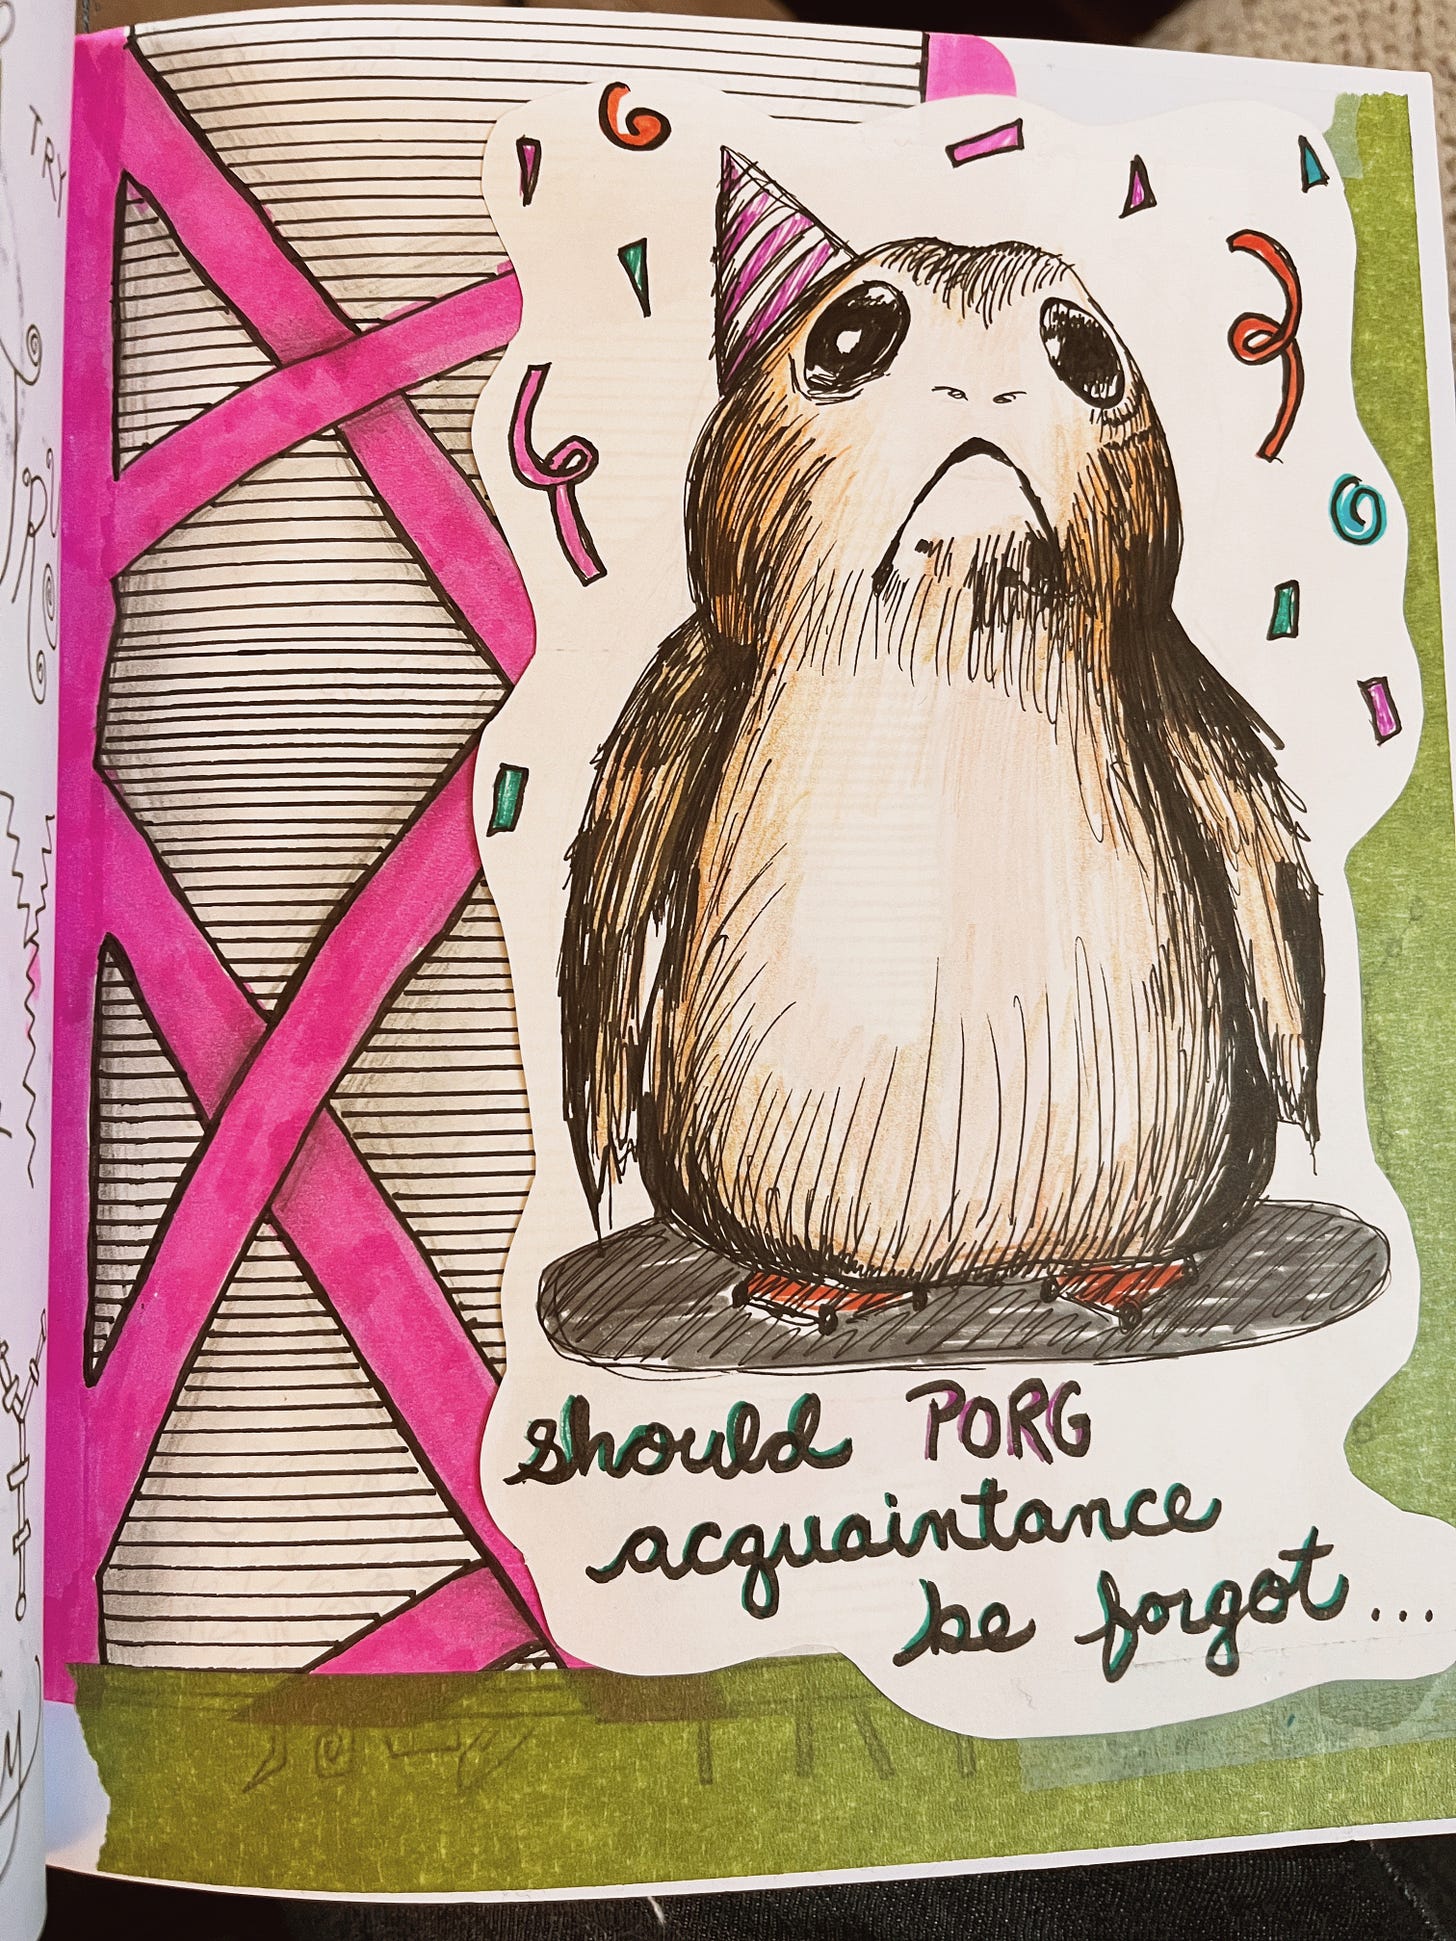 A sketch of a Porg from Star Wars, wearing a party hat and surrounded by streamers, with the words, "Should PORG Acquaintances Be Forgot" below it. The background is a pen and marker abstract doodle, and the sketch is attached with green painter's tape.